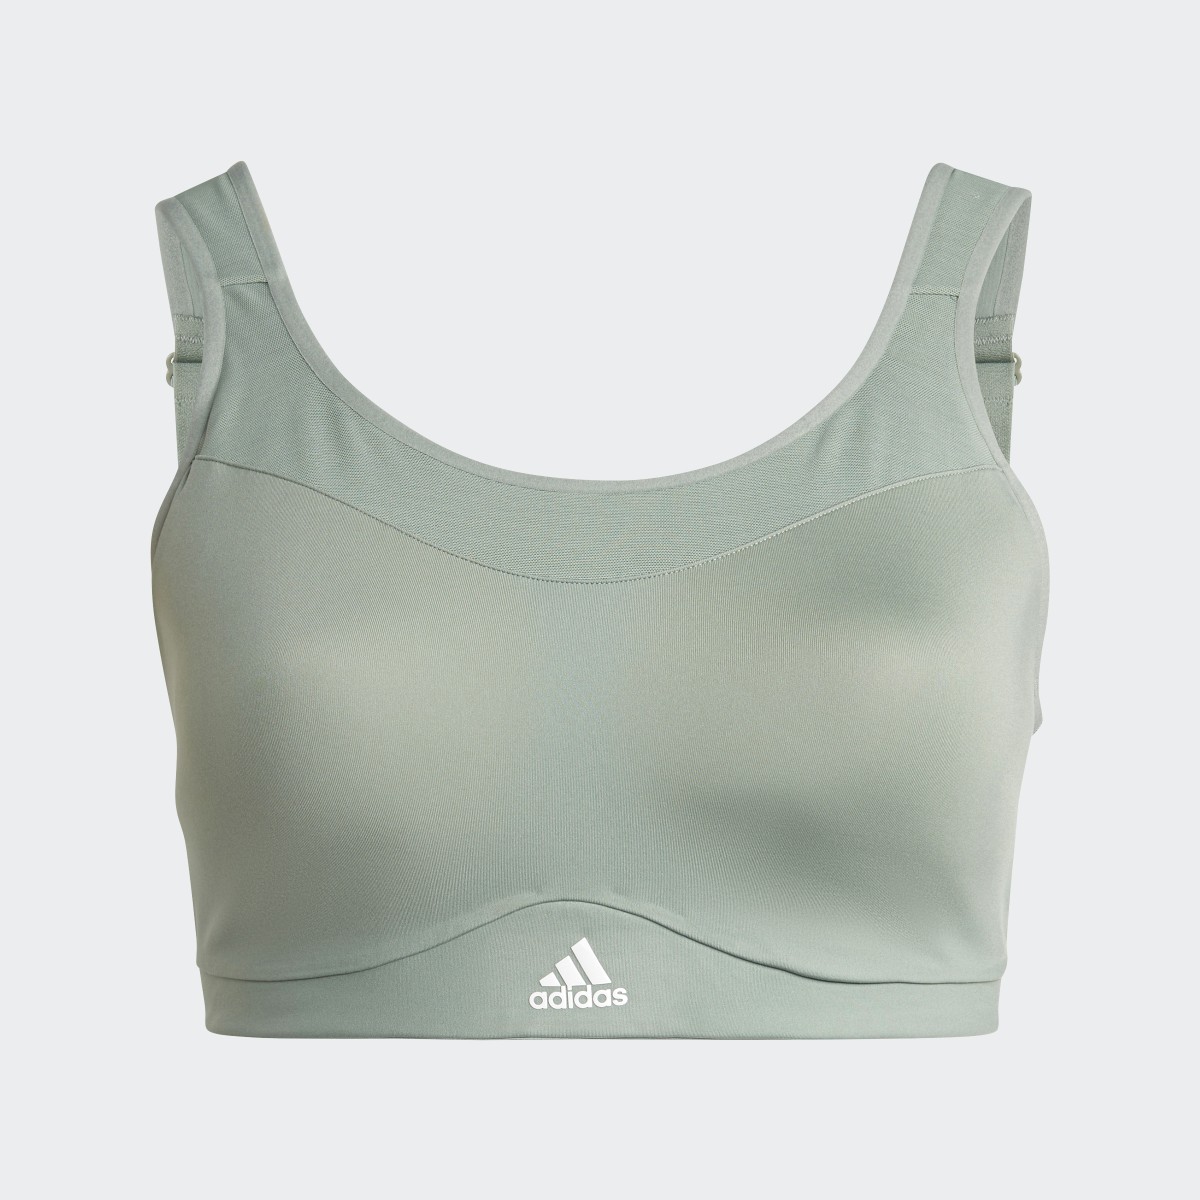 Adidas Brassière adidas TLRD Impact Training Maintien fort (Grandes tailles). 5